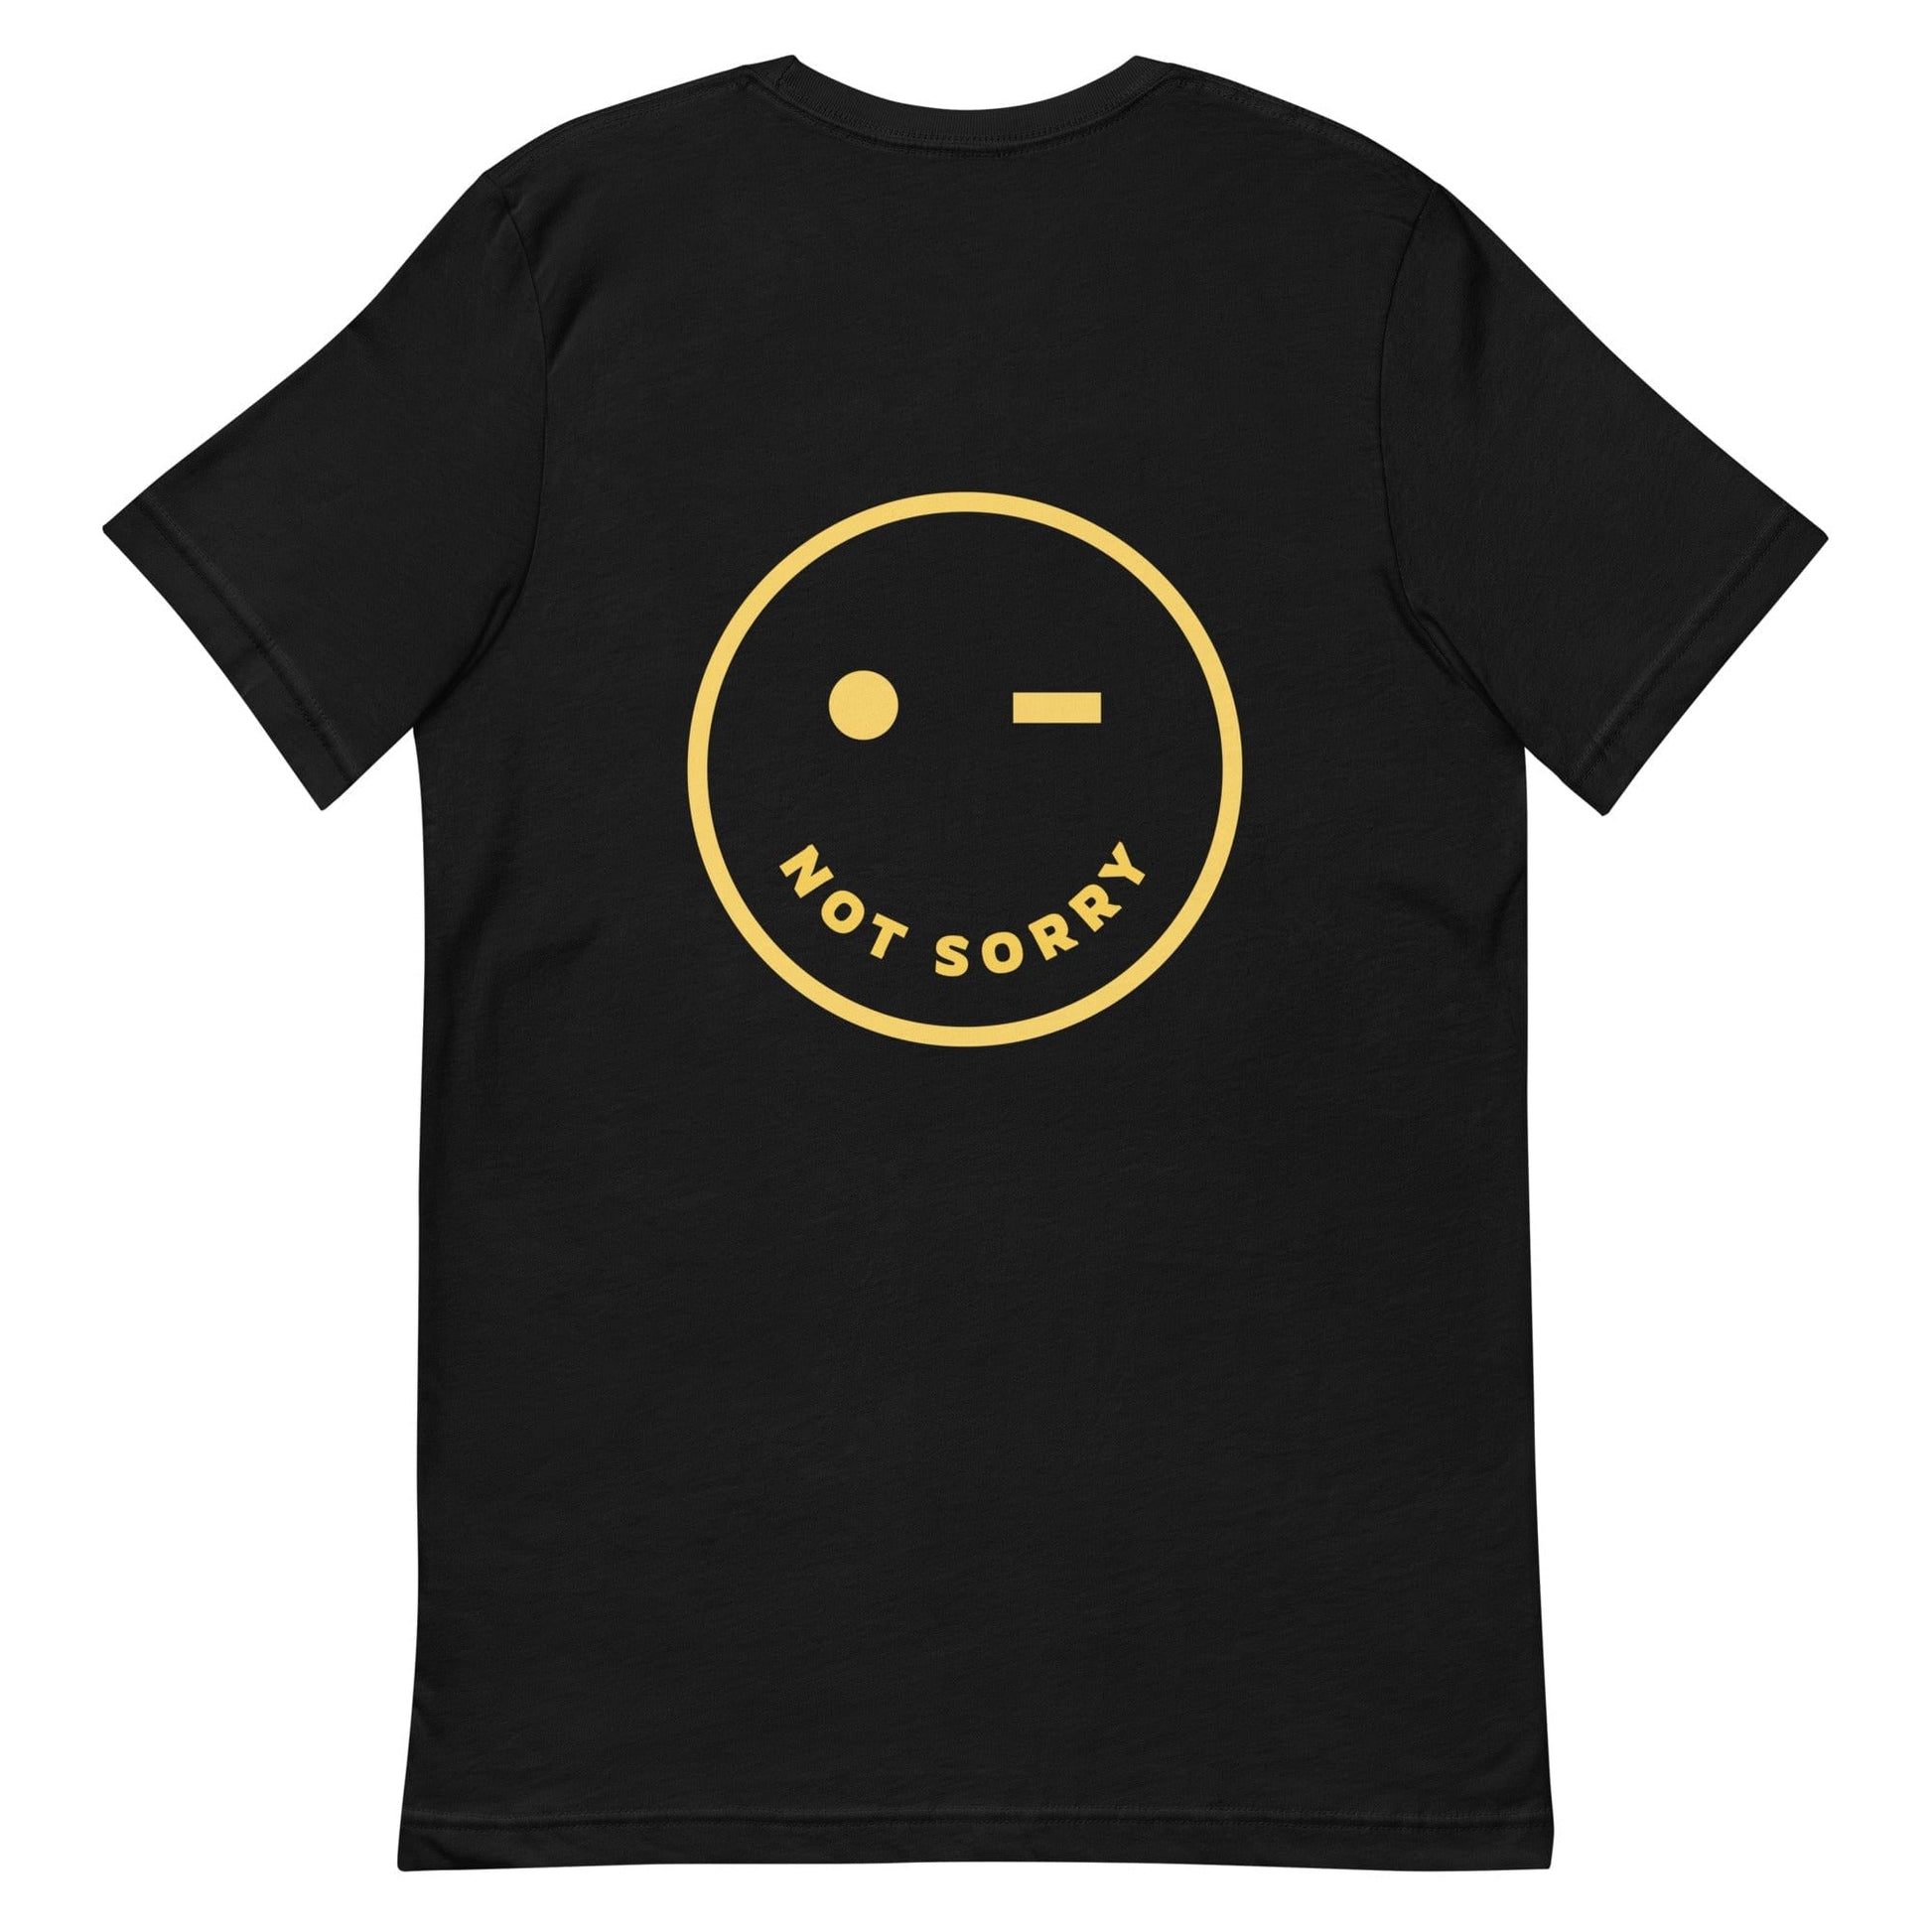 genderless-sorry-not-sorry-tshirt-quote-apparel-black-and-yellow-at-feminist-define